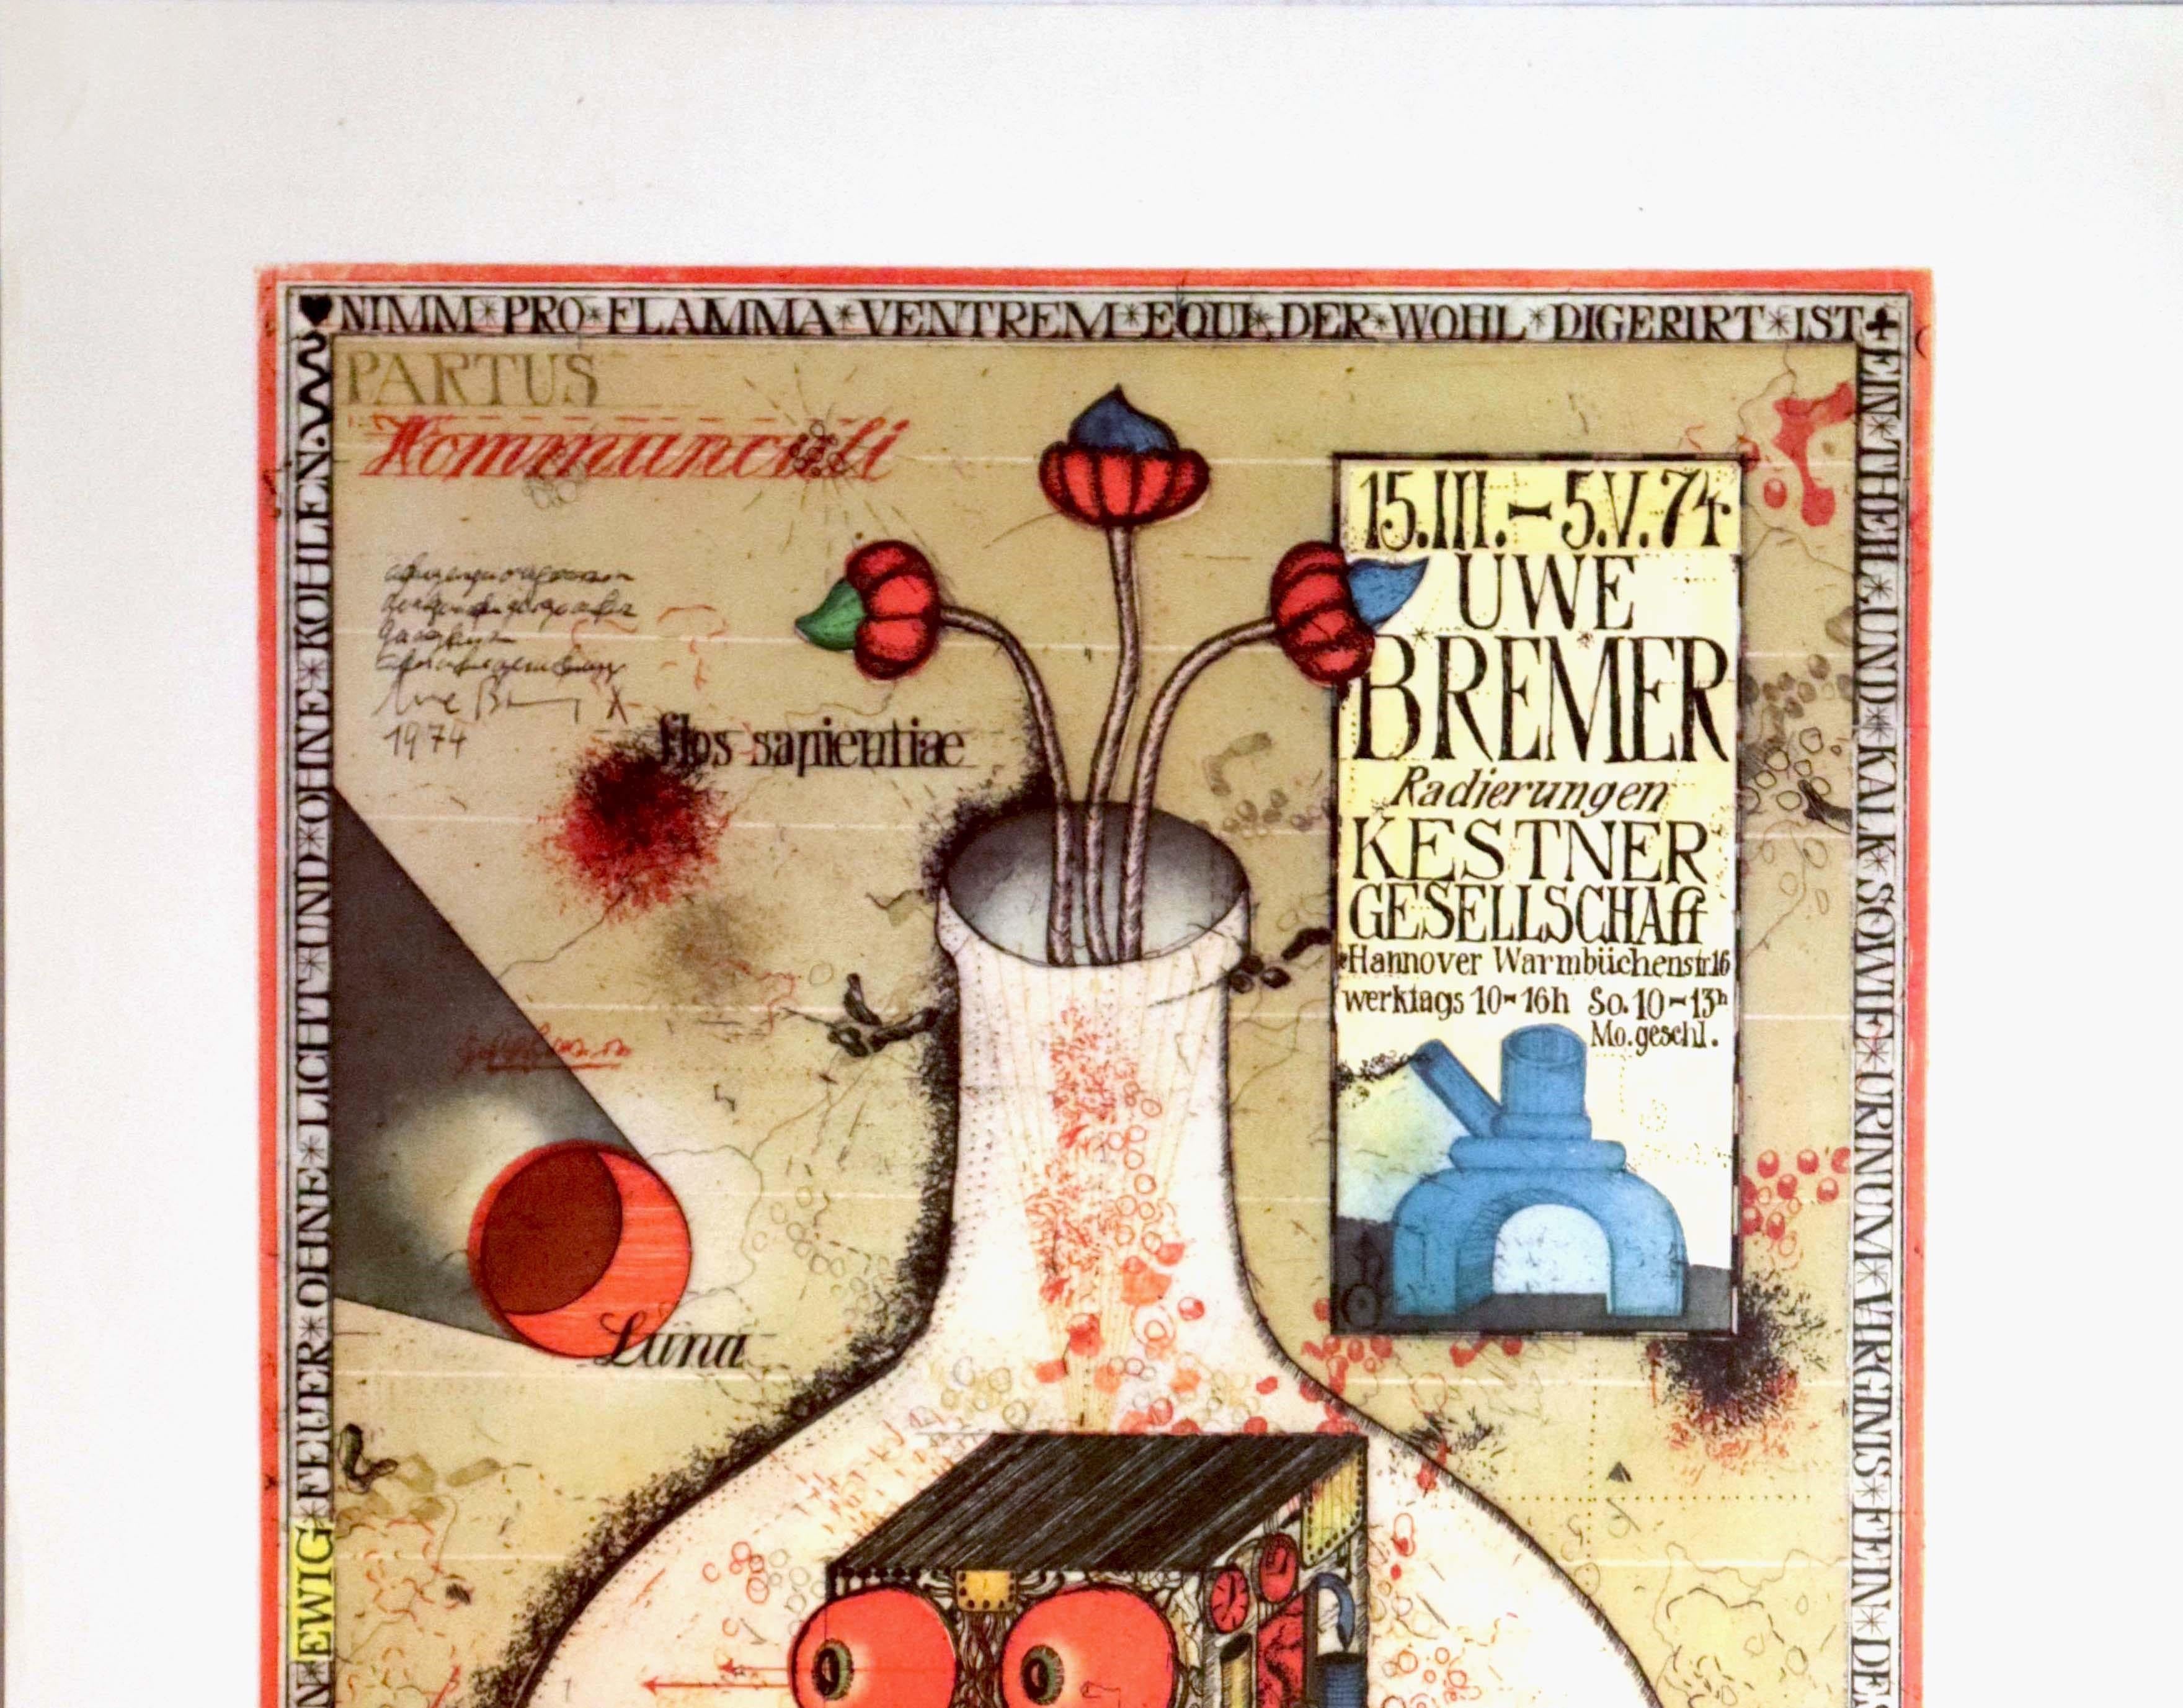 Original vintage advertising poster for an exhibition of etchings and artwork by the German fantastic realist painter and graphic artist Uwe Bremer (b.1940) at the Kestner Society in Hannover from 15 March to 5 May 1974 featuring a surreal design of